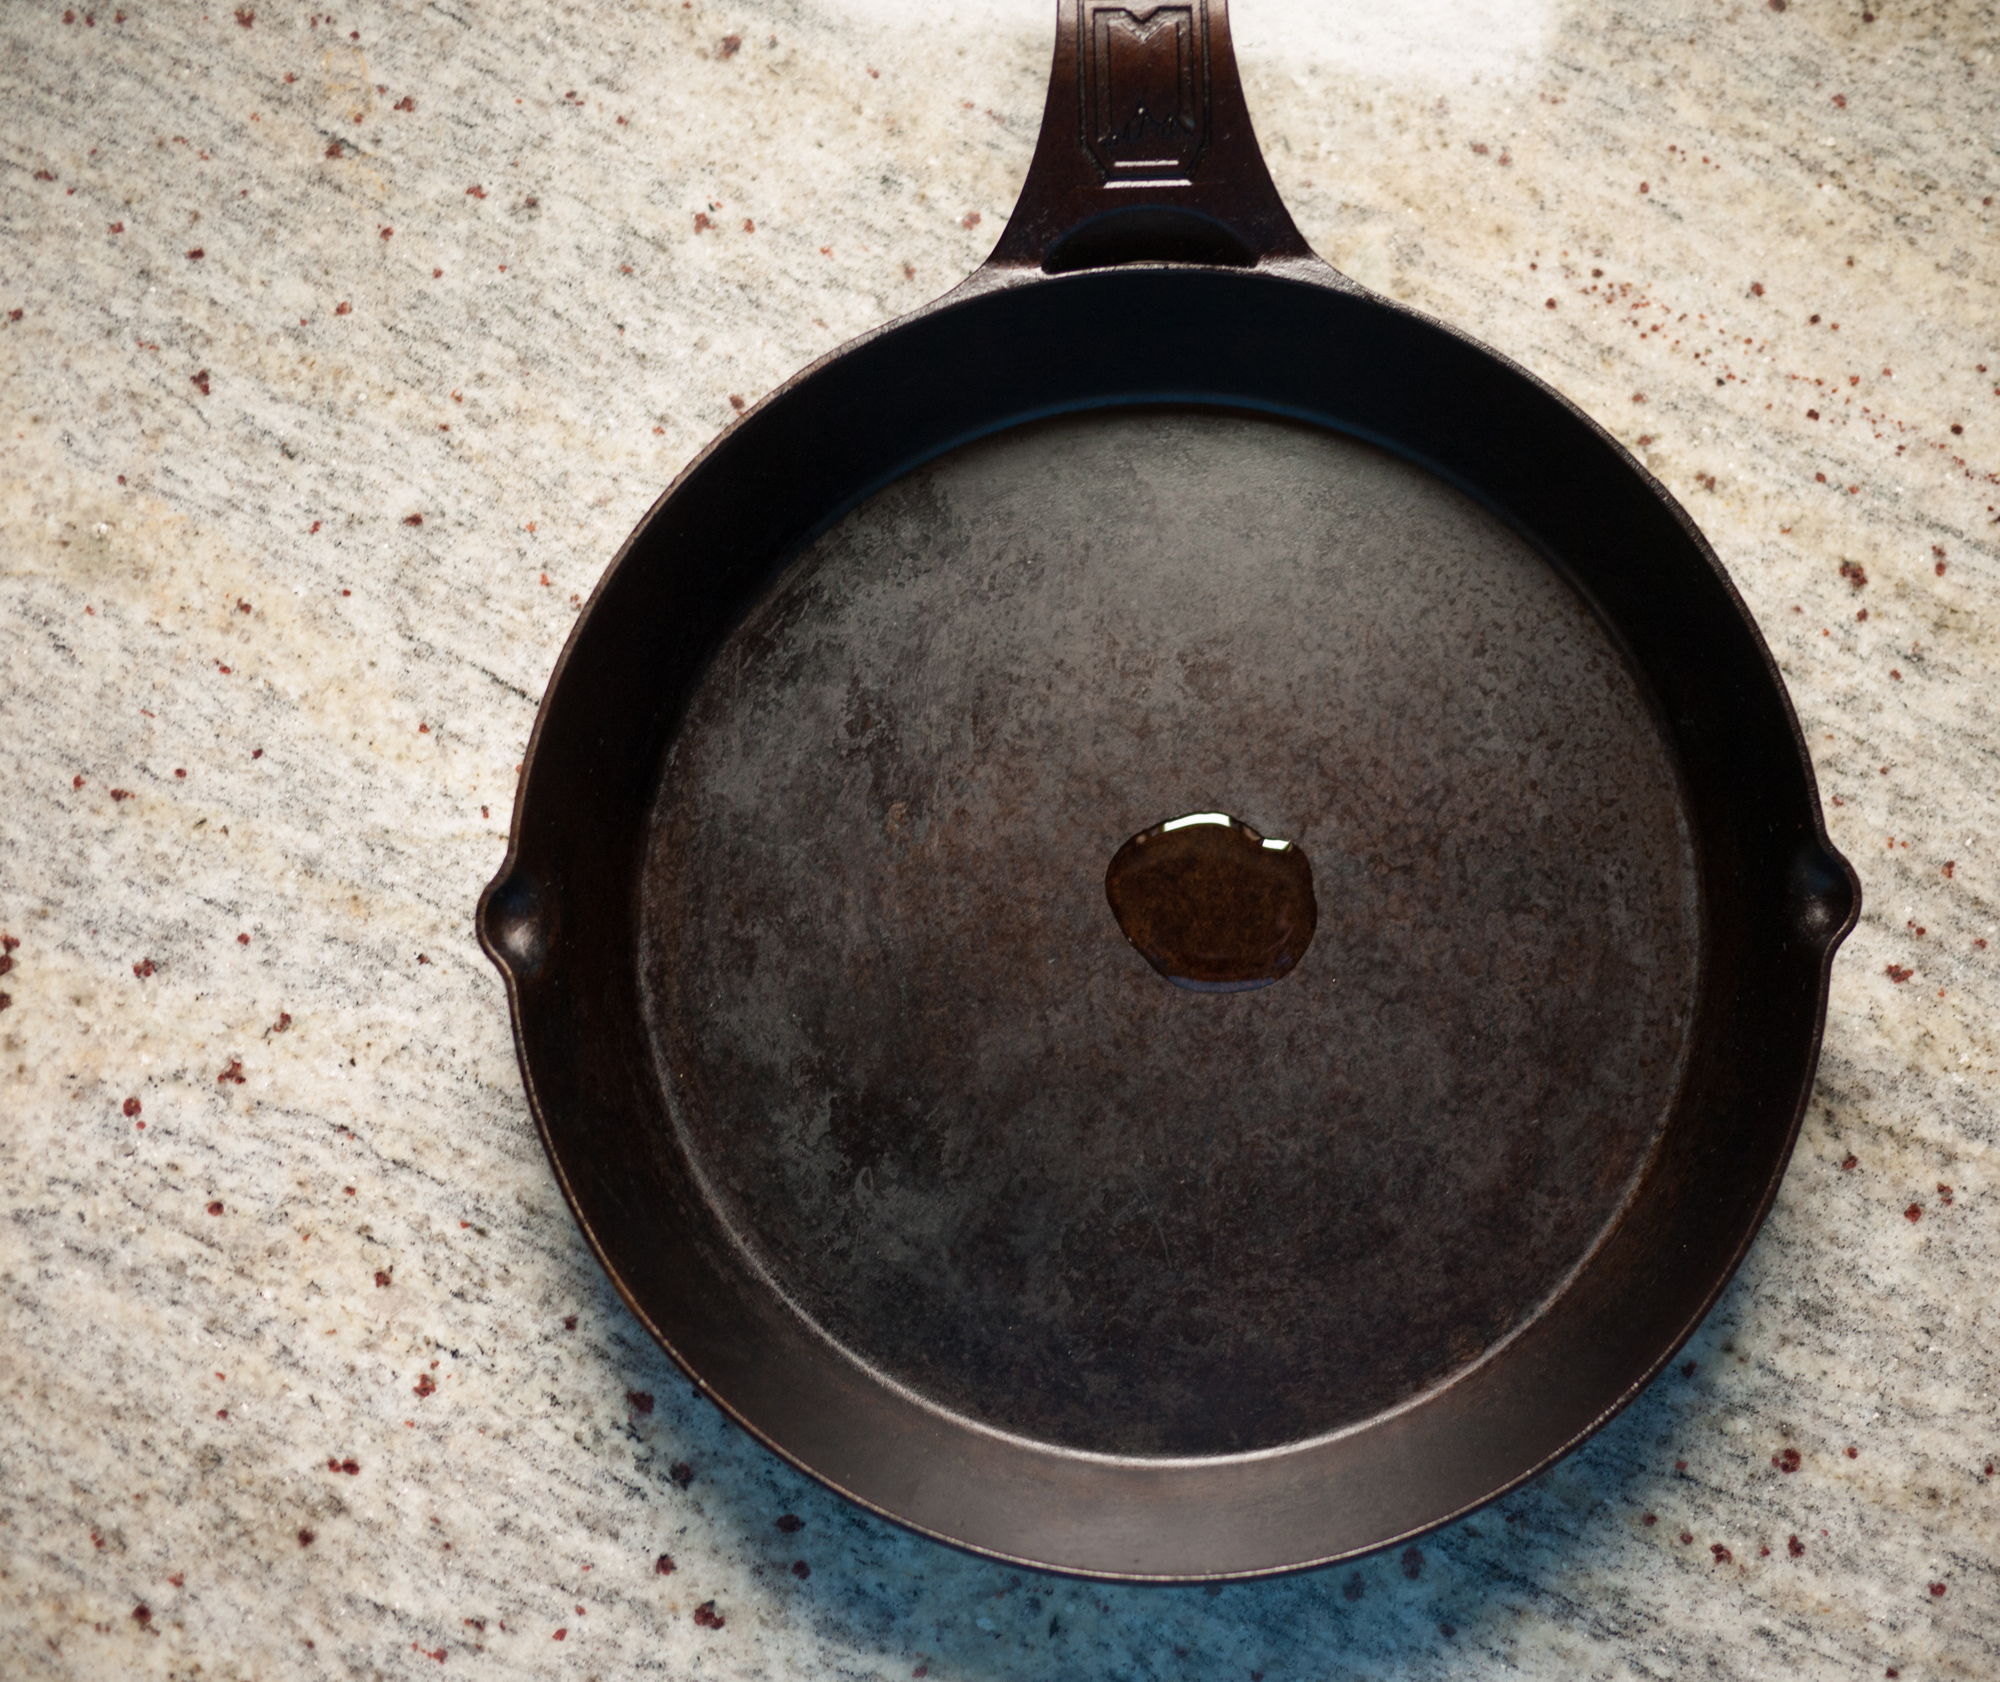 Seasoning Cast Iron Skillets  How to Use Your Cast Iron the Right Way